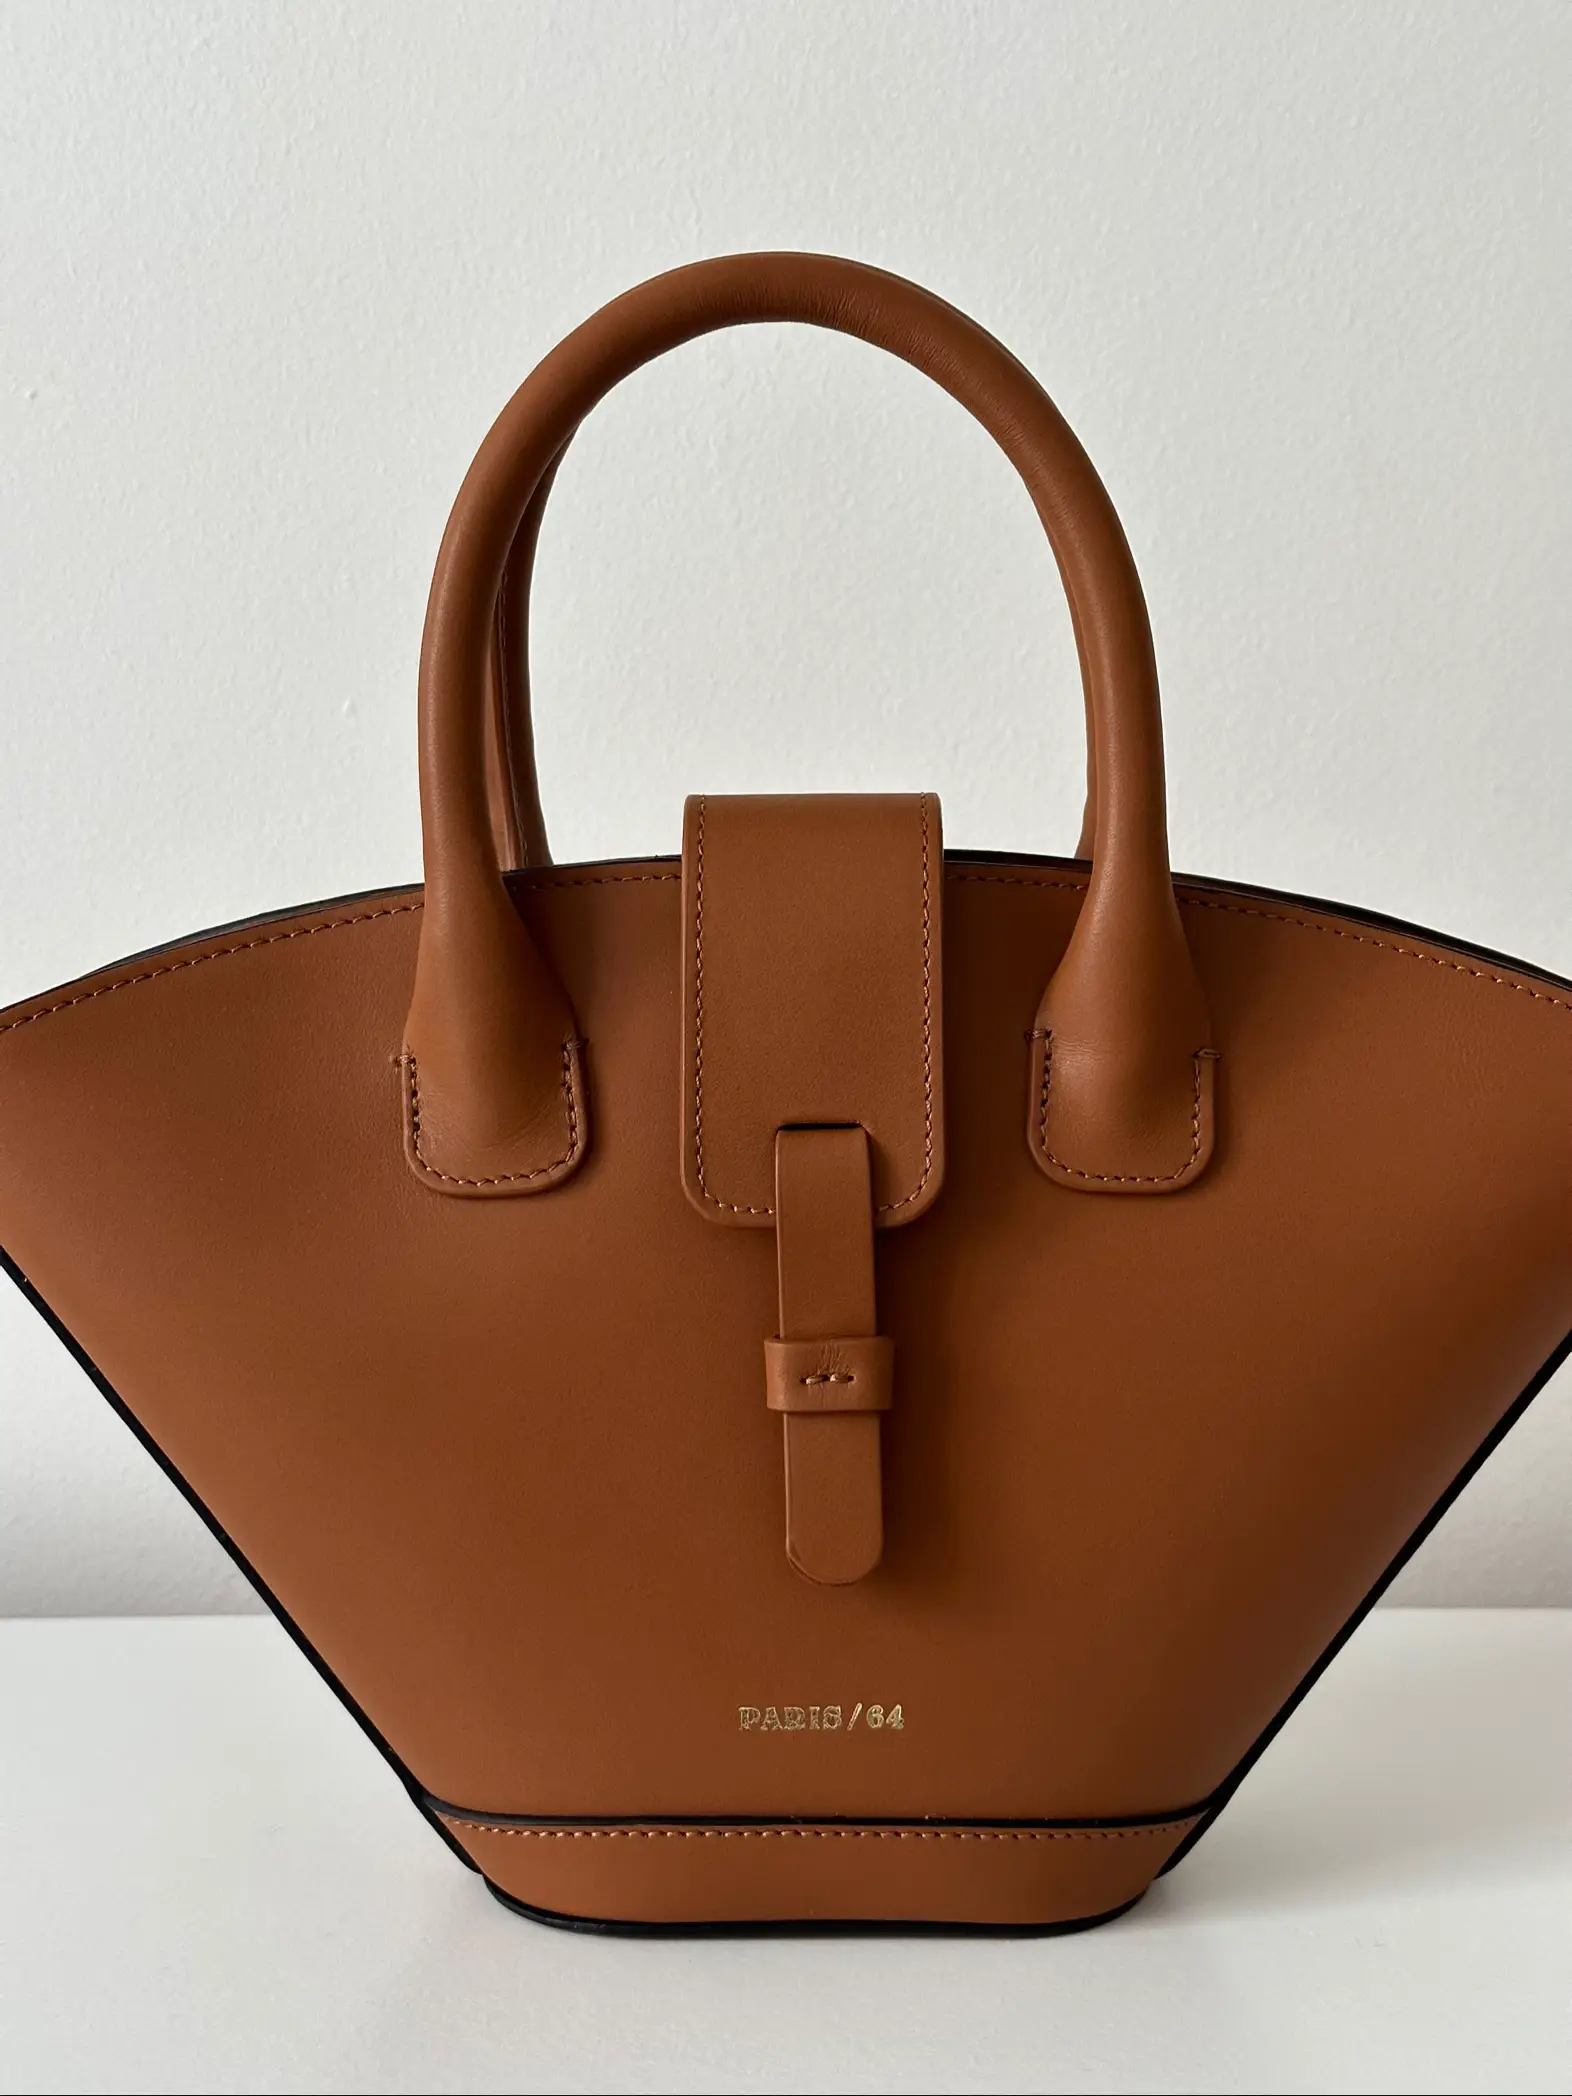 PARIS/64 Mini Lumière Caramel bag review    | Gallery posted by